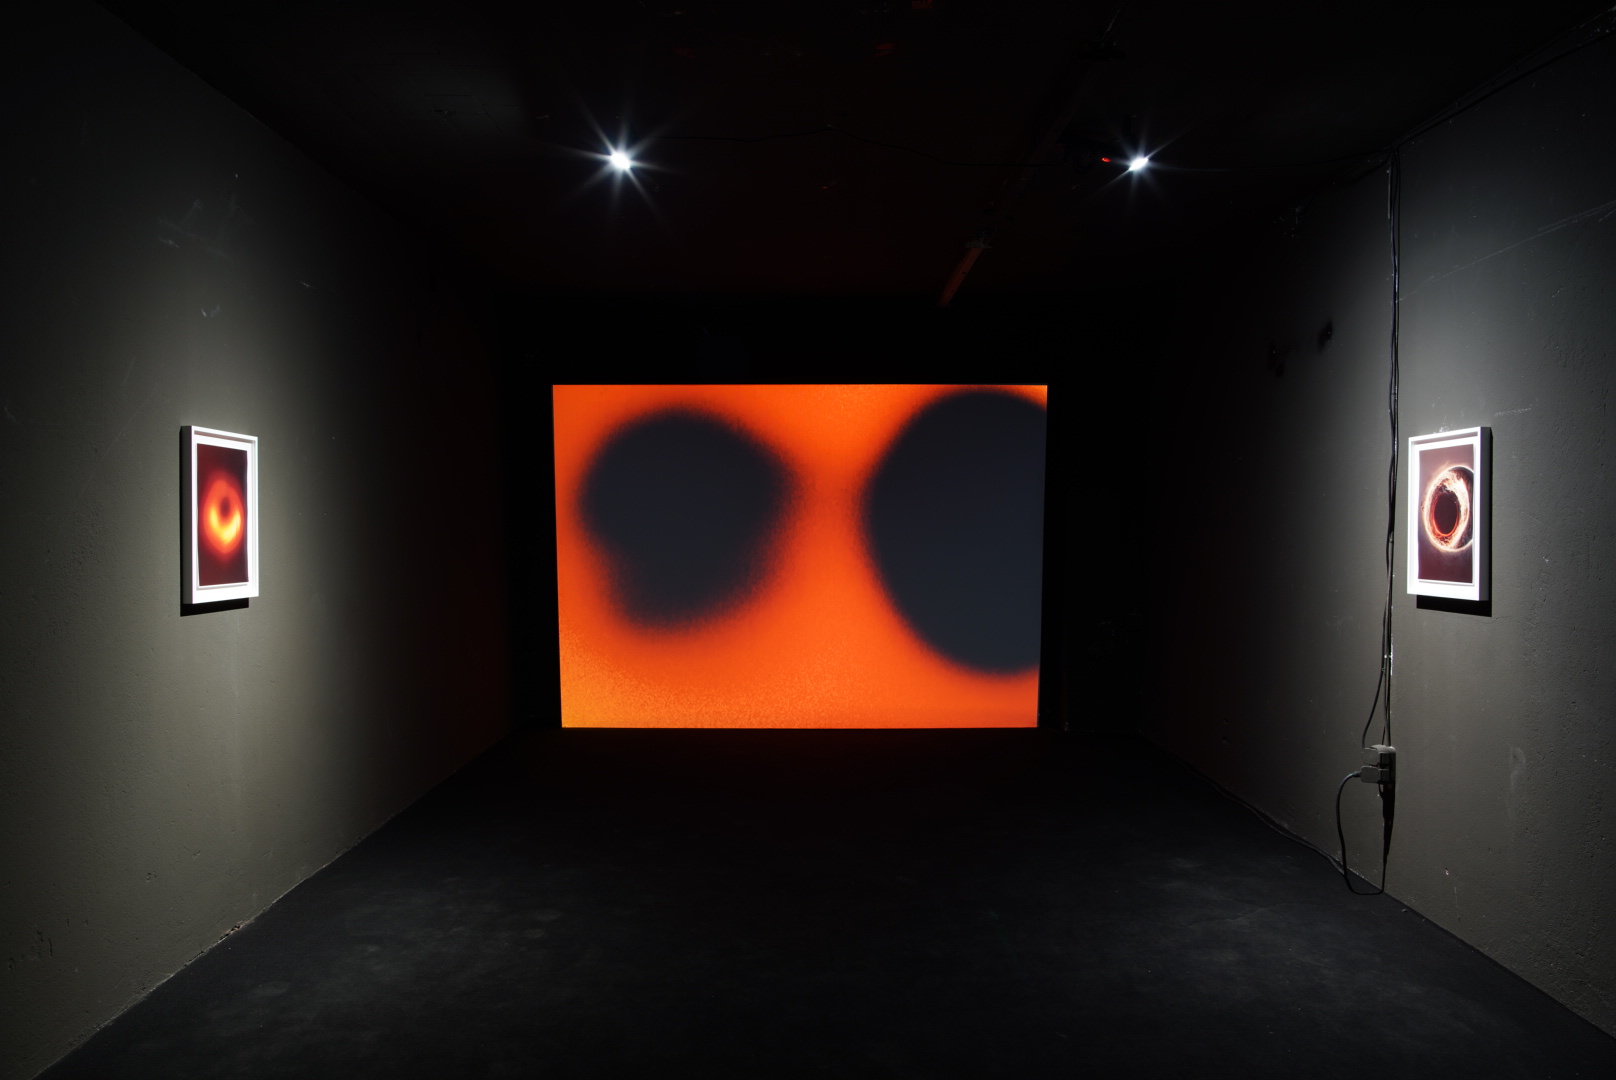 Stephan Machac GRAVITATIONAL WAVES (WITHOUT GRAVITY TEARS DON'T FALL) - Volume 2, 2022 2022 Installation view - GRAVITATIONAL WAVES (WITHOUT GRAVITY TEARS DON'T FALL) Volume 2, 2022